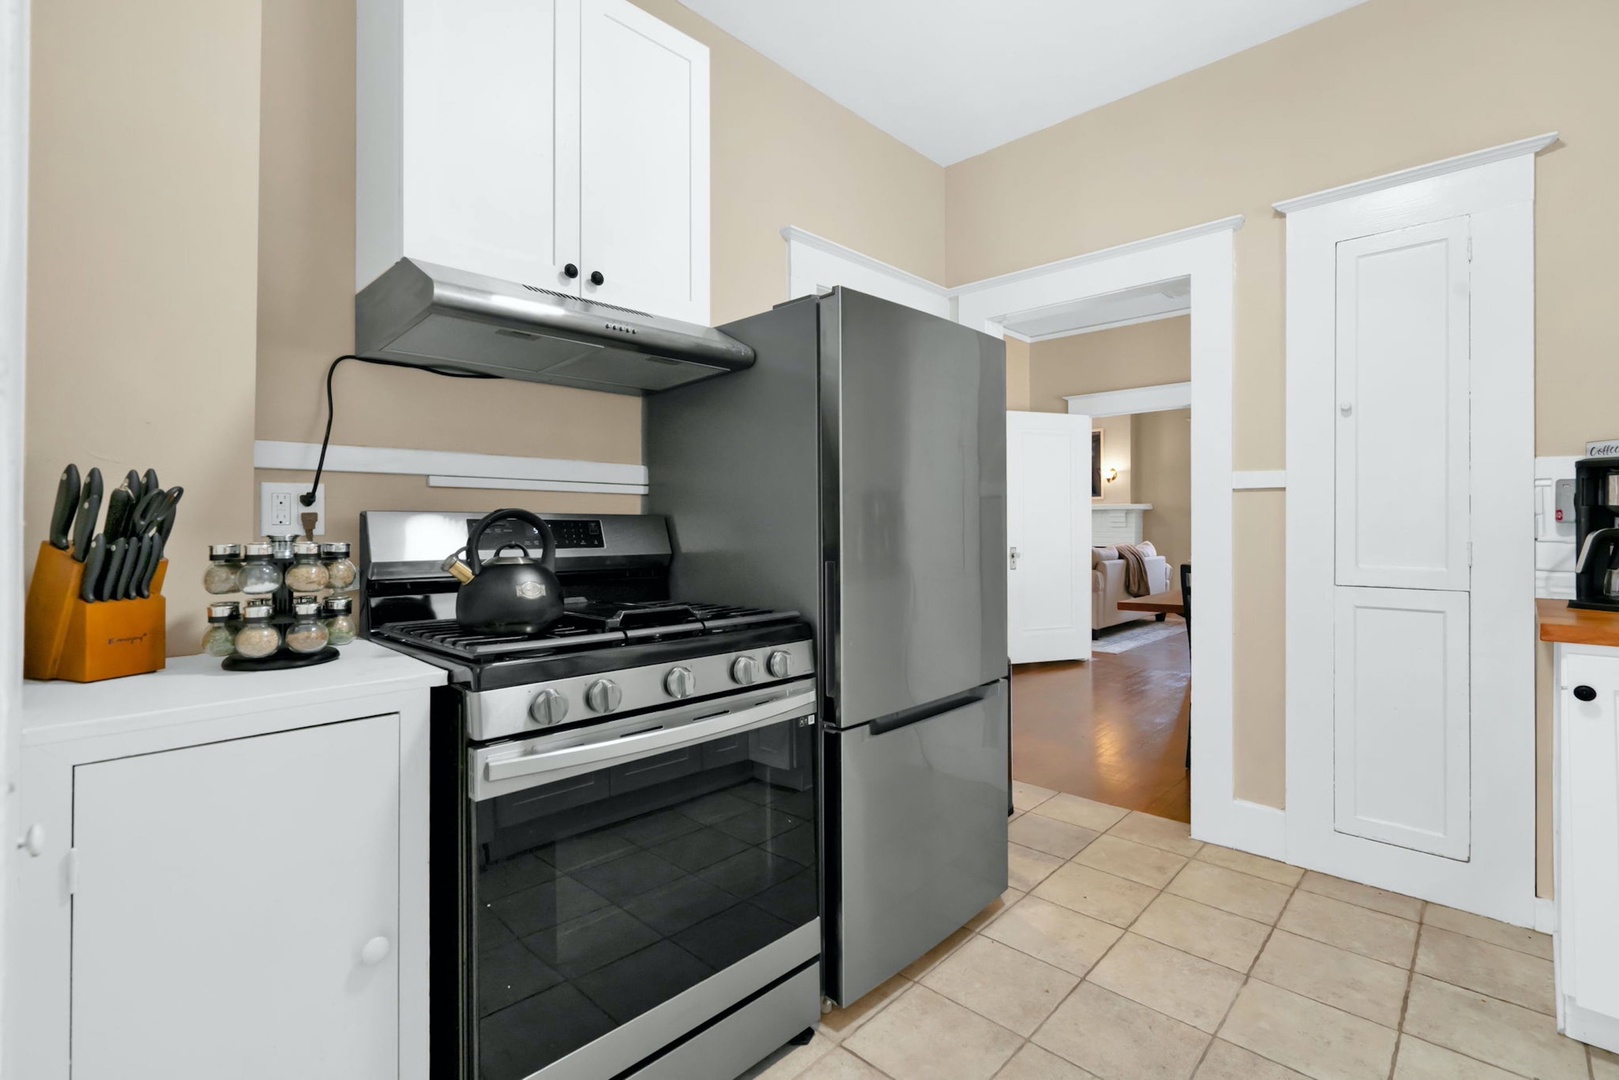 The cozy kitchen provides ample space & every home comfort